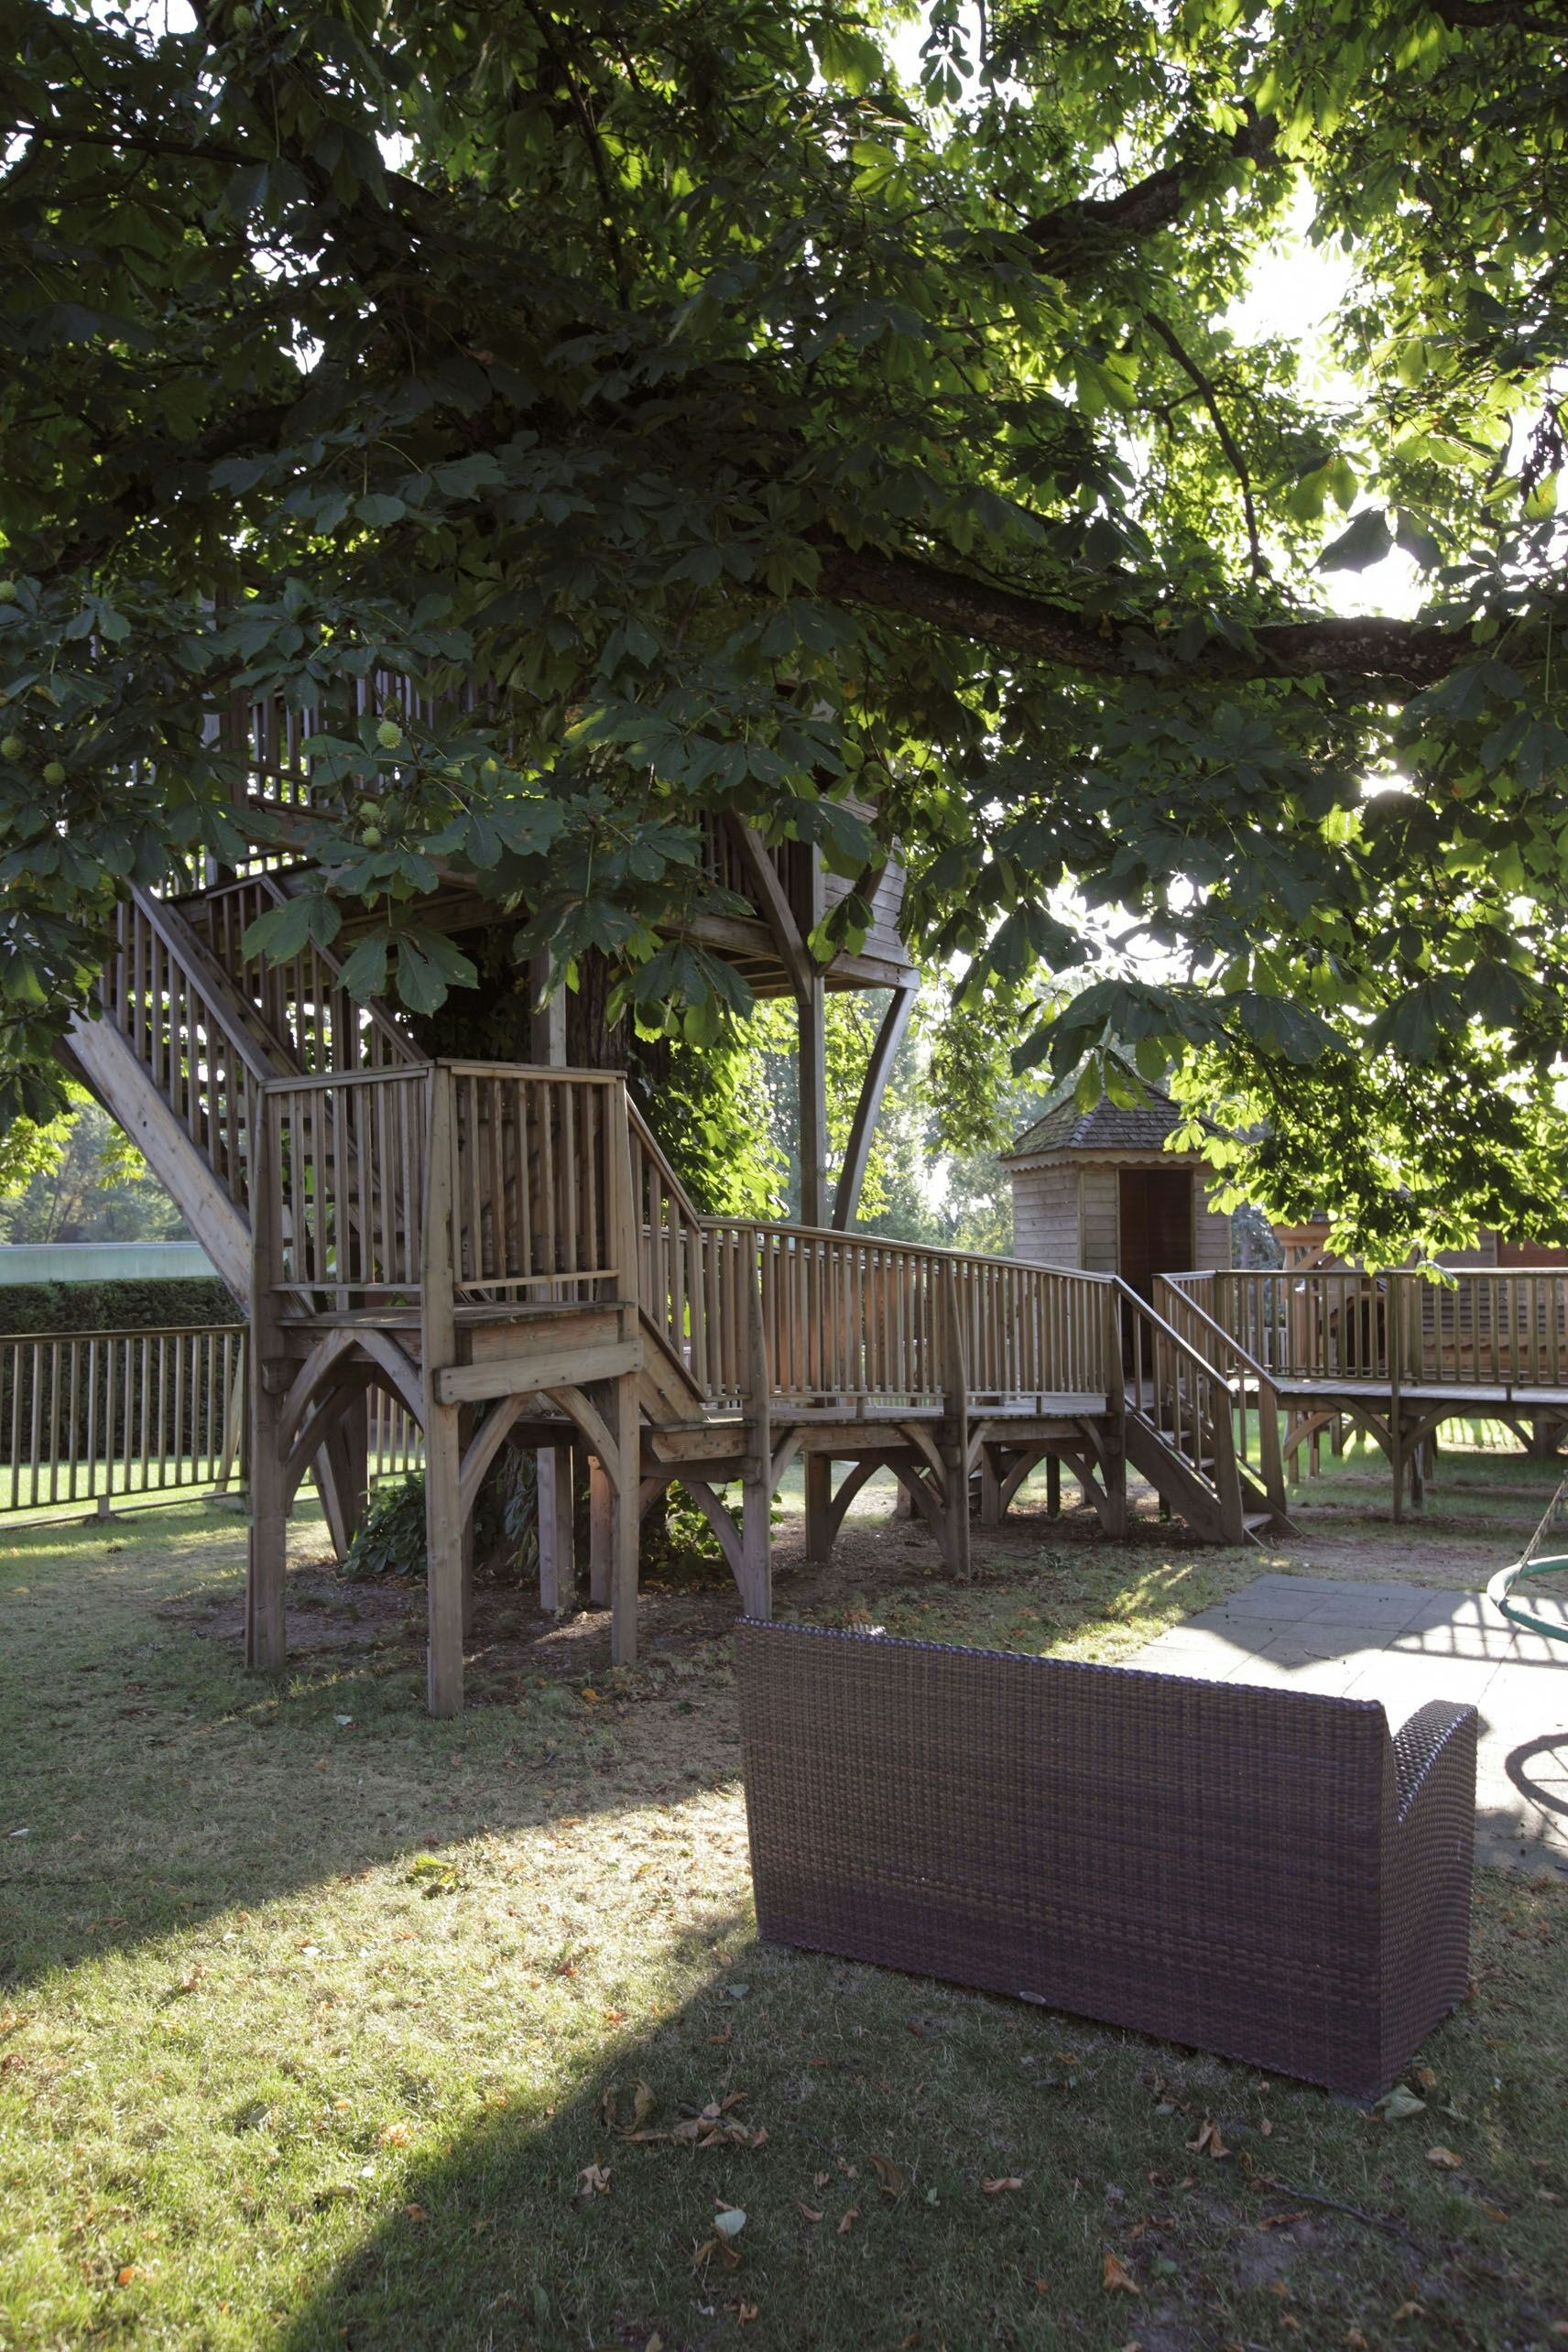 The treehouse and outdoor obstacle course at La Petite Resérve, Geneva.